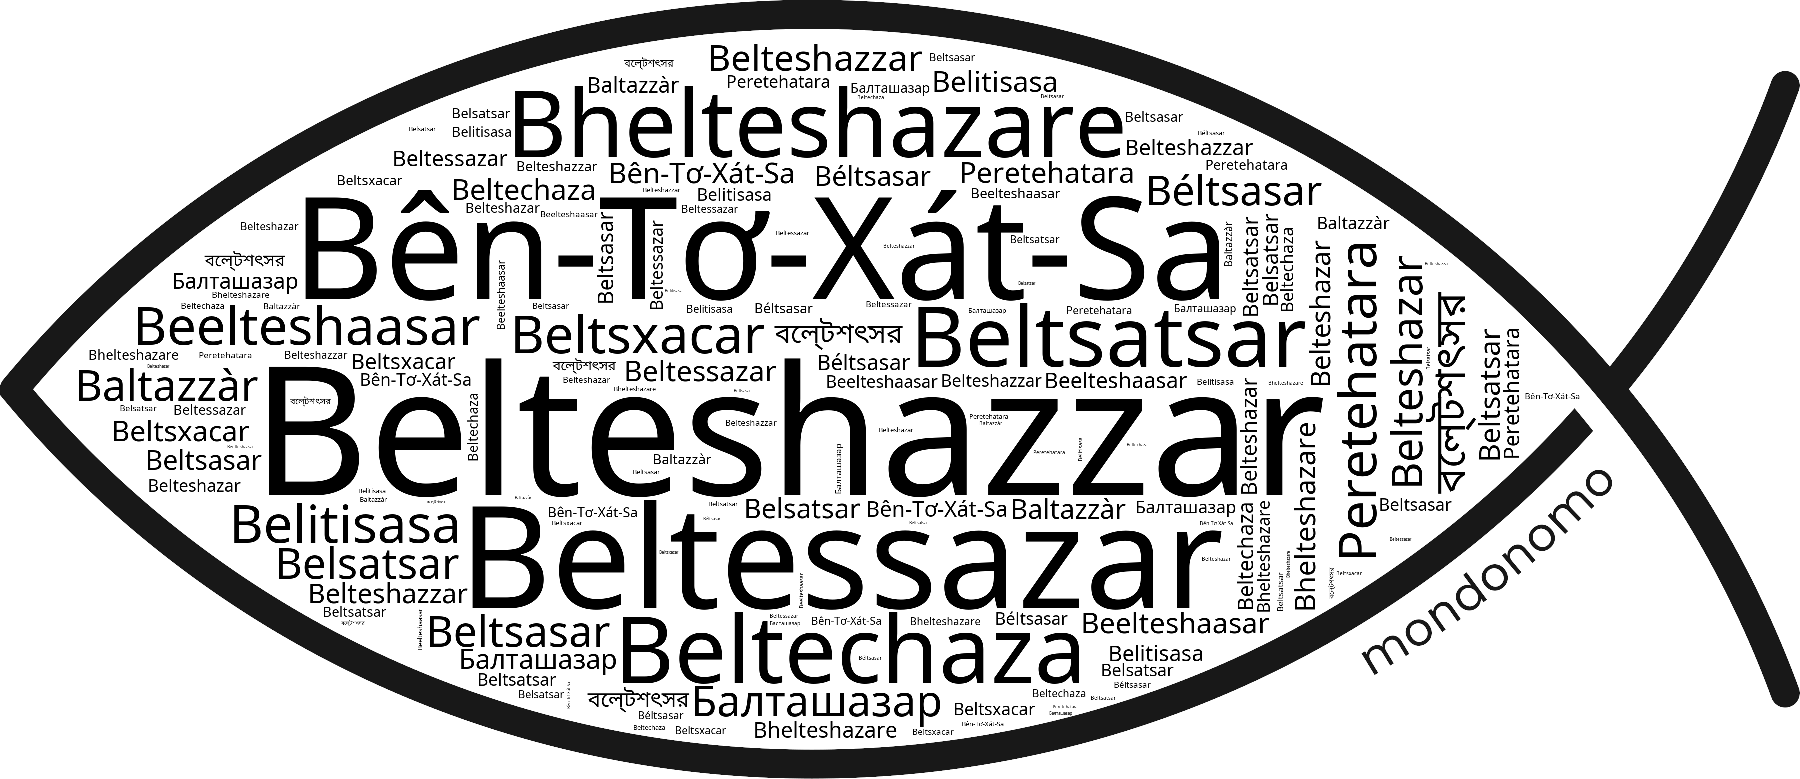 Name Belteshazzar in the world's Bibles